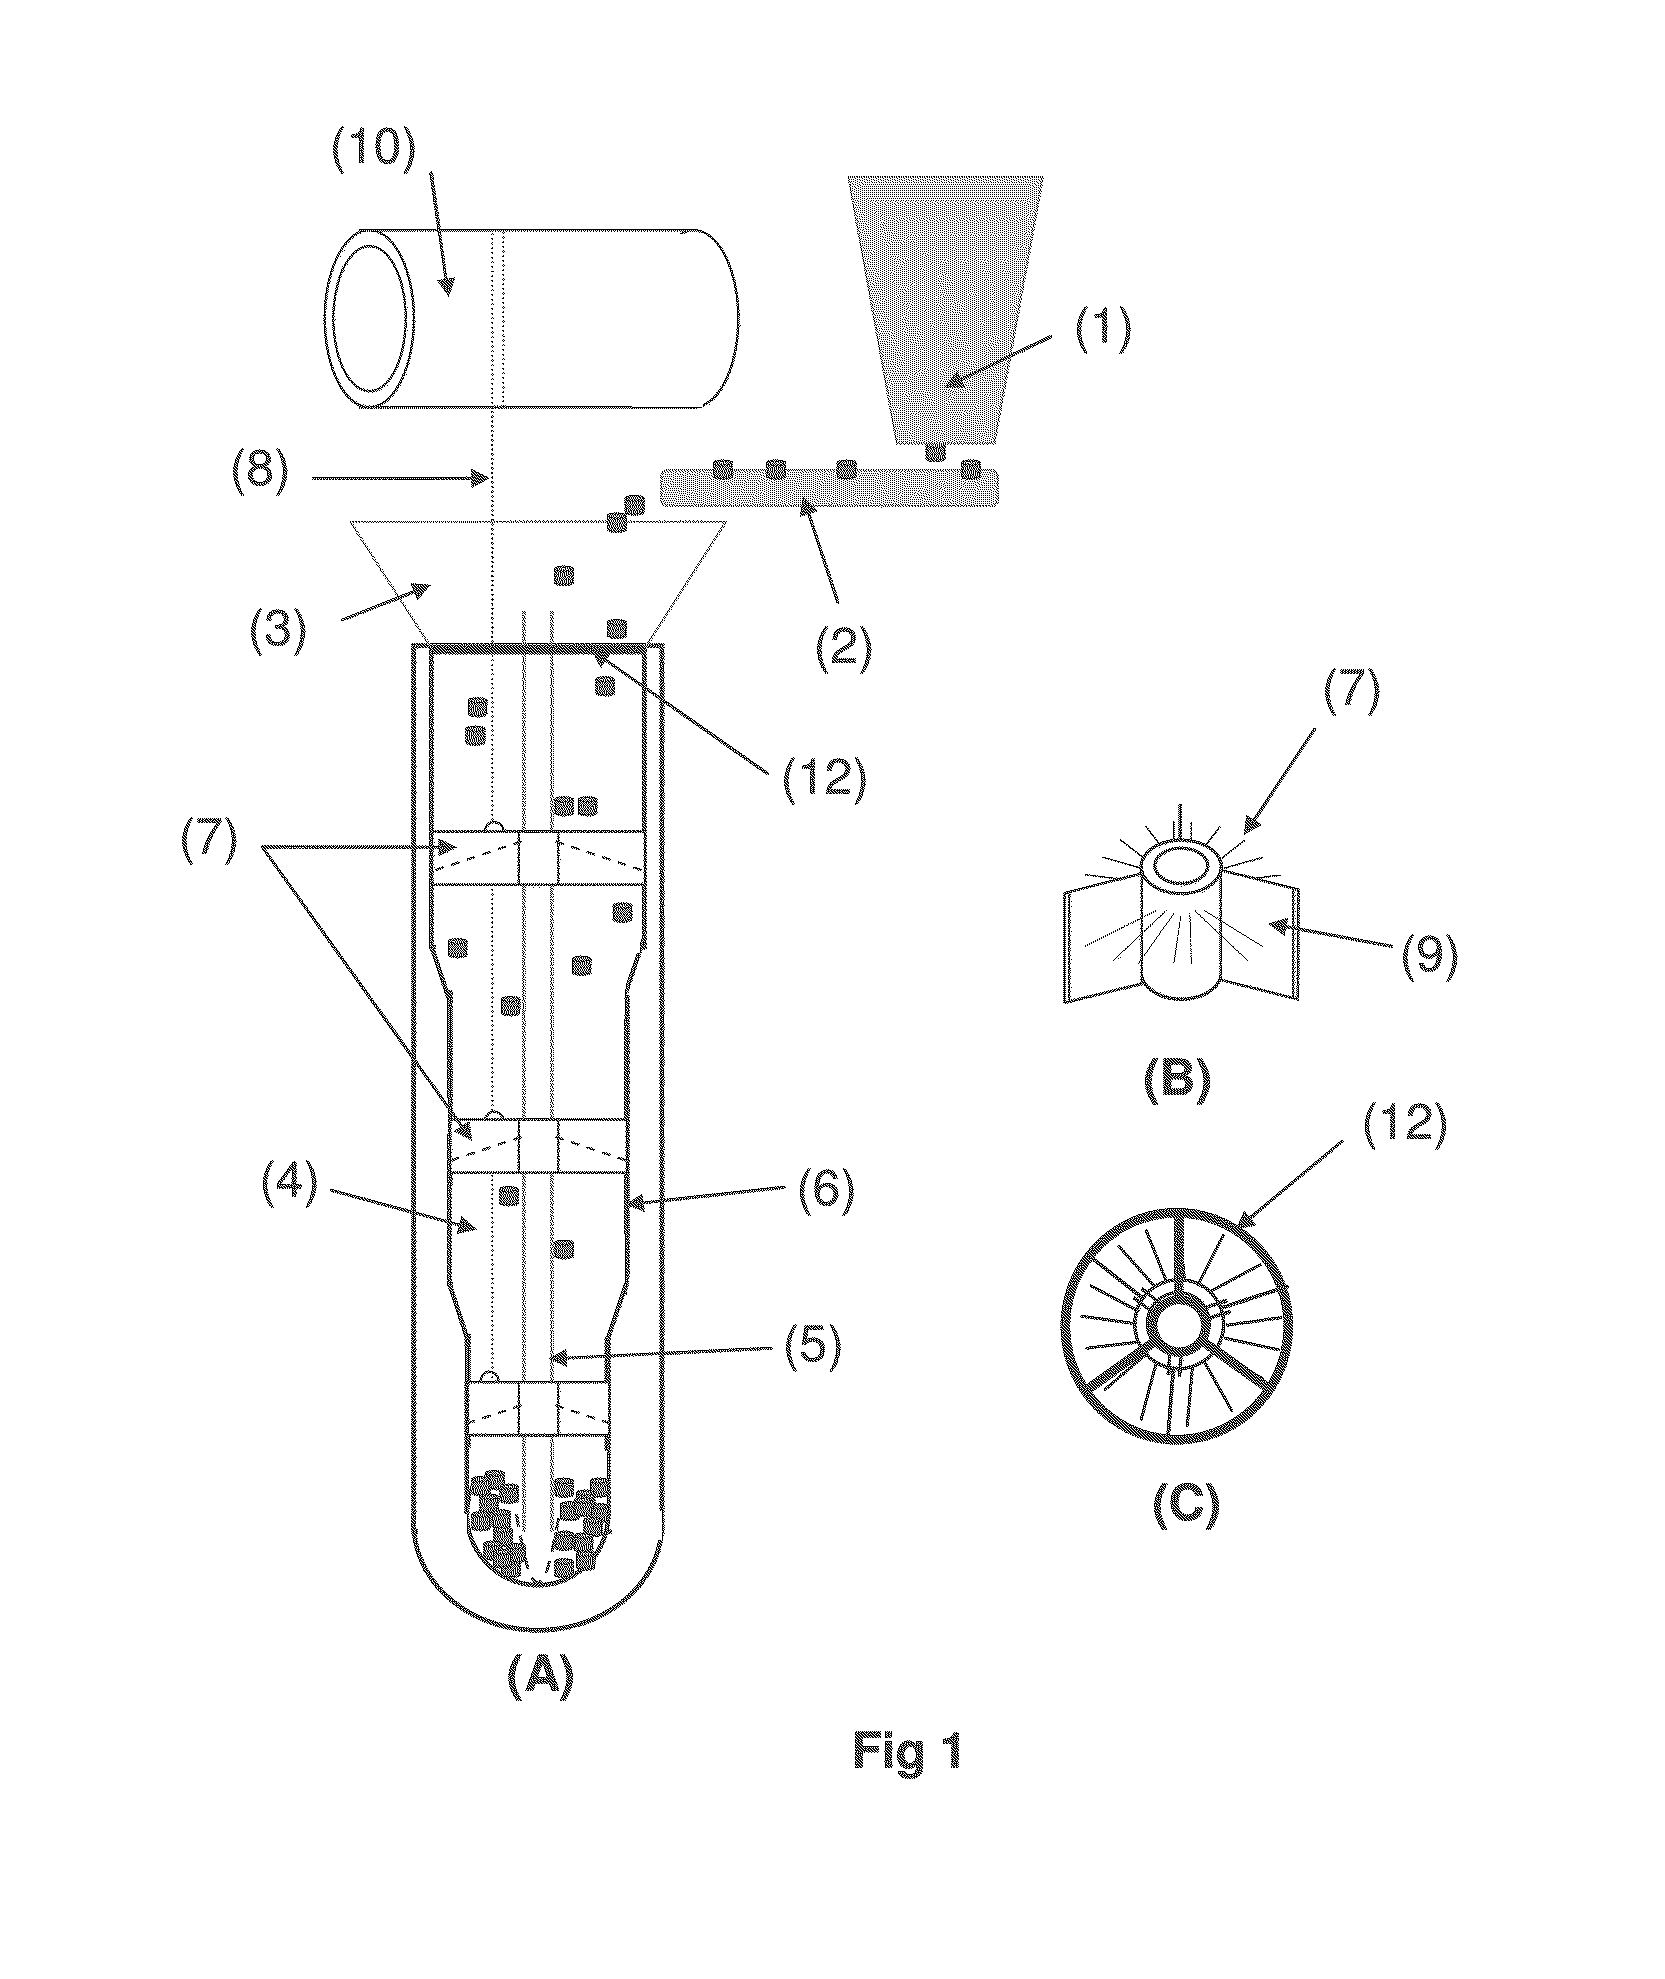 System for dense loading of catalyst into bayonet tubes for a steam reforming exchanger-reactor using flexible and removable slowing elements